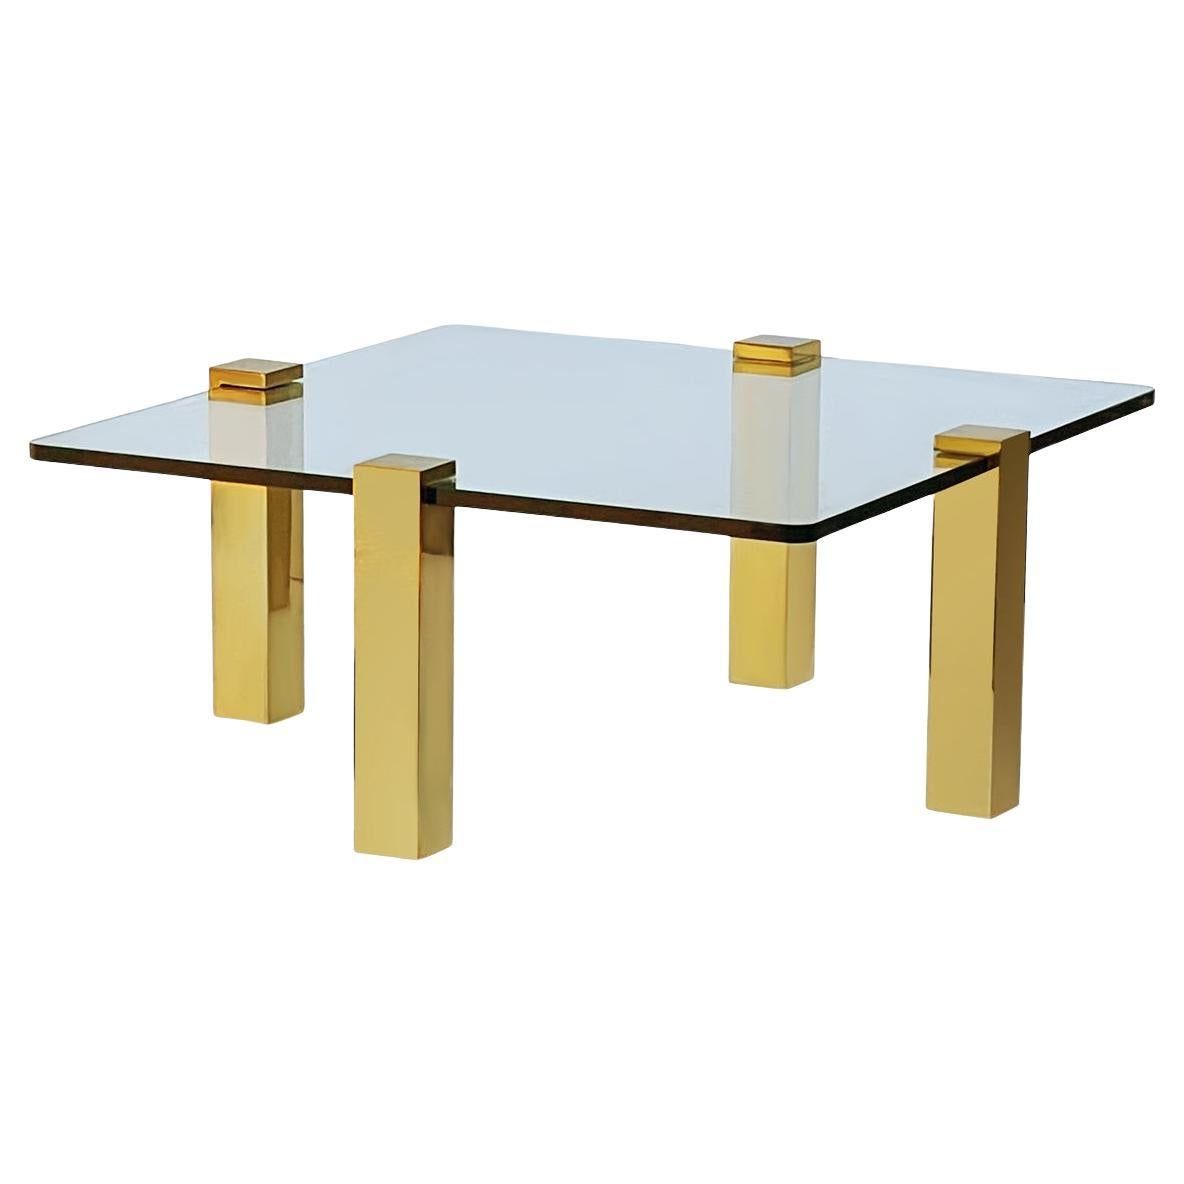 Mid Century Transitional Modern Square Cocktail Table In Brass And Within Hassch Modern Square Cocktail Tables (Gallery 11 of 20)